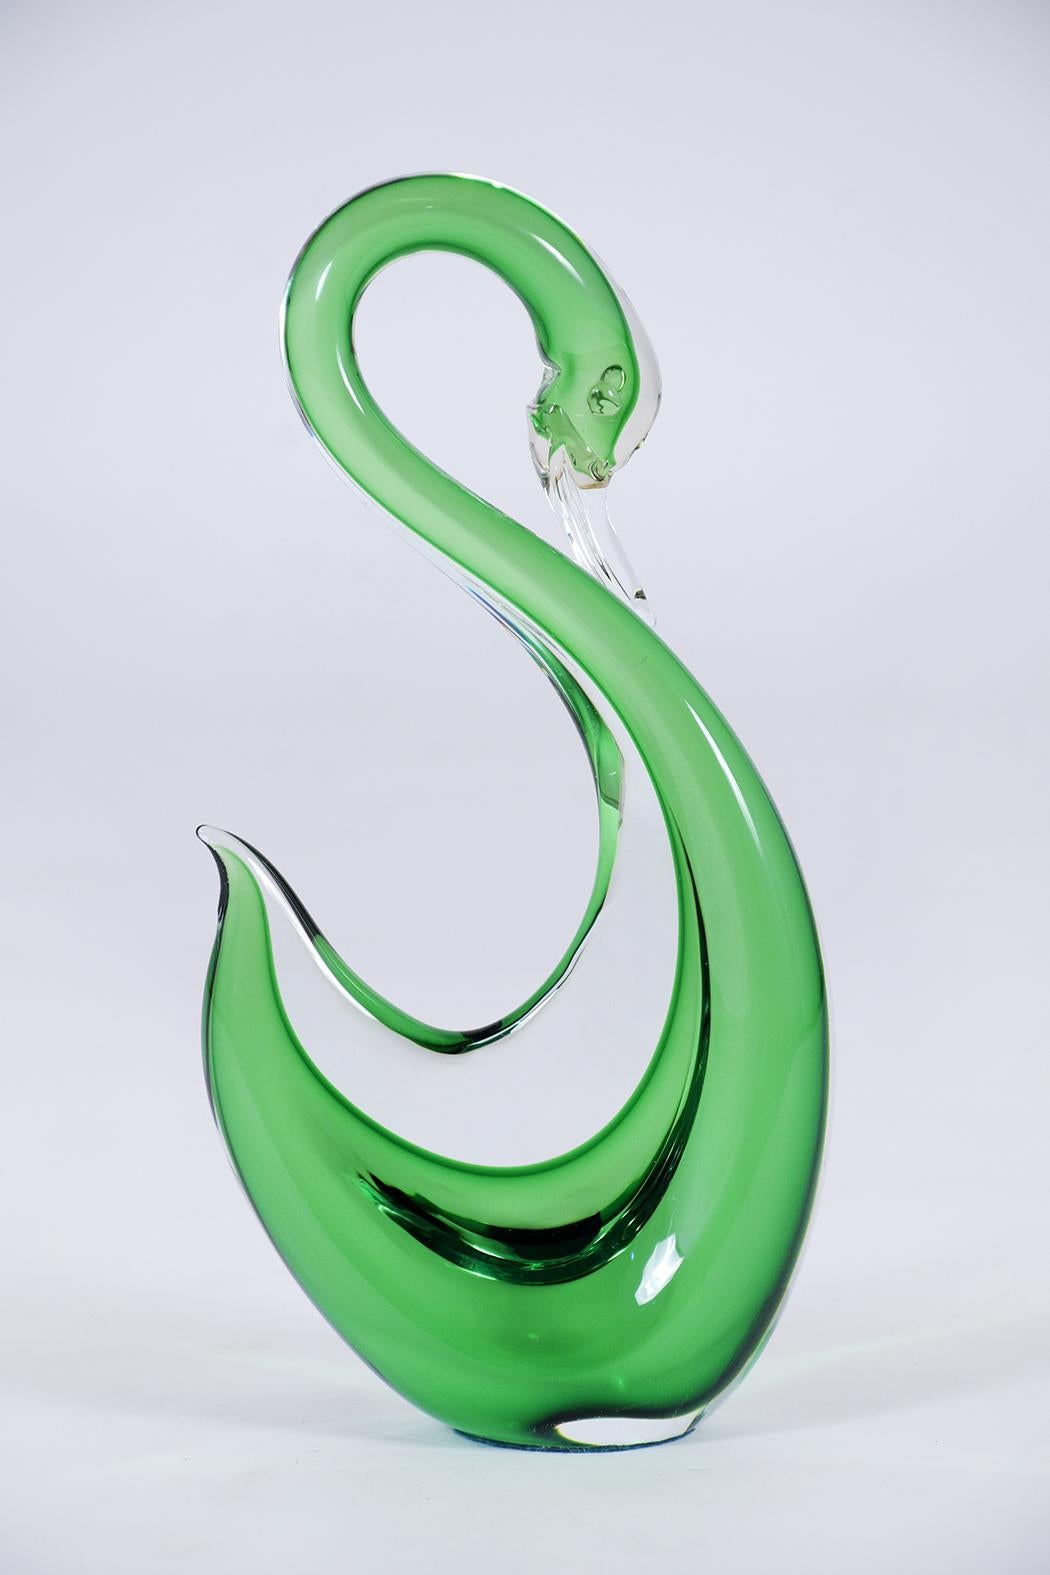 This fabulous vintage Italian Murano art glass sculpture is handcrafted, features a green and clear color design, and is in great condition. This vintage hand-blown glass swan is ready to be displayed in your home or office space for years to come.